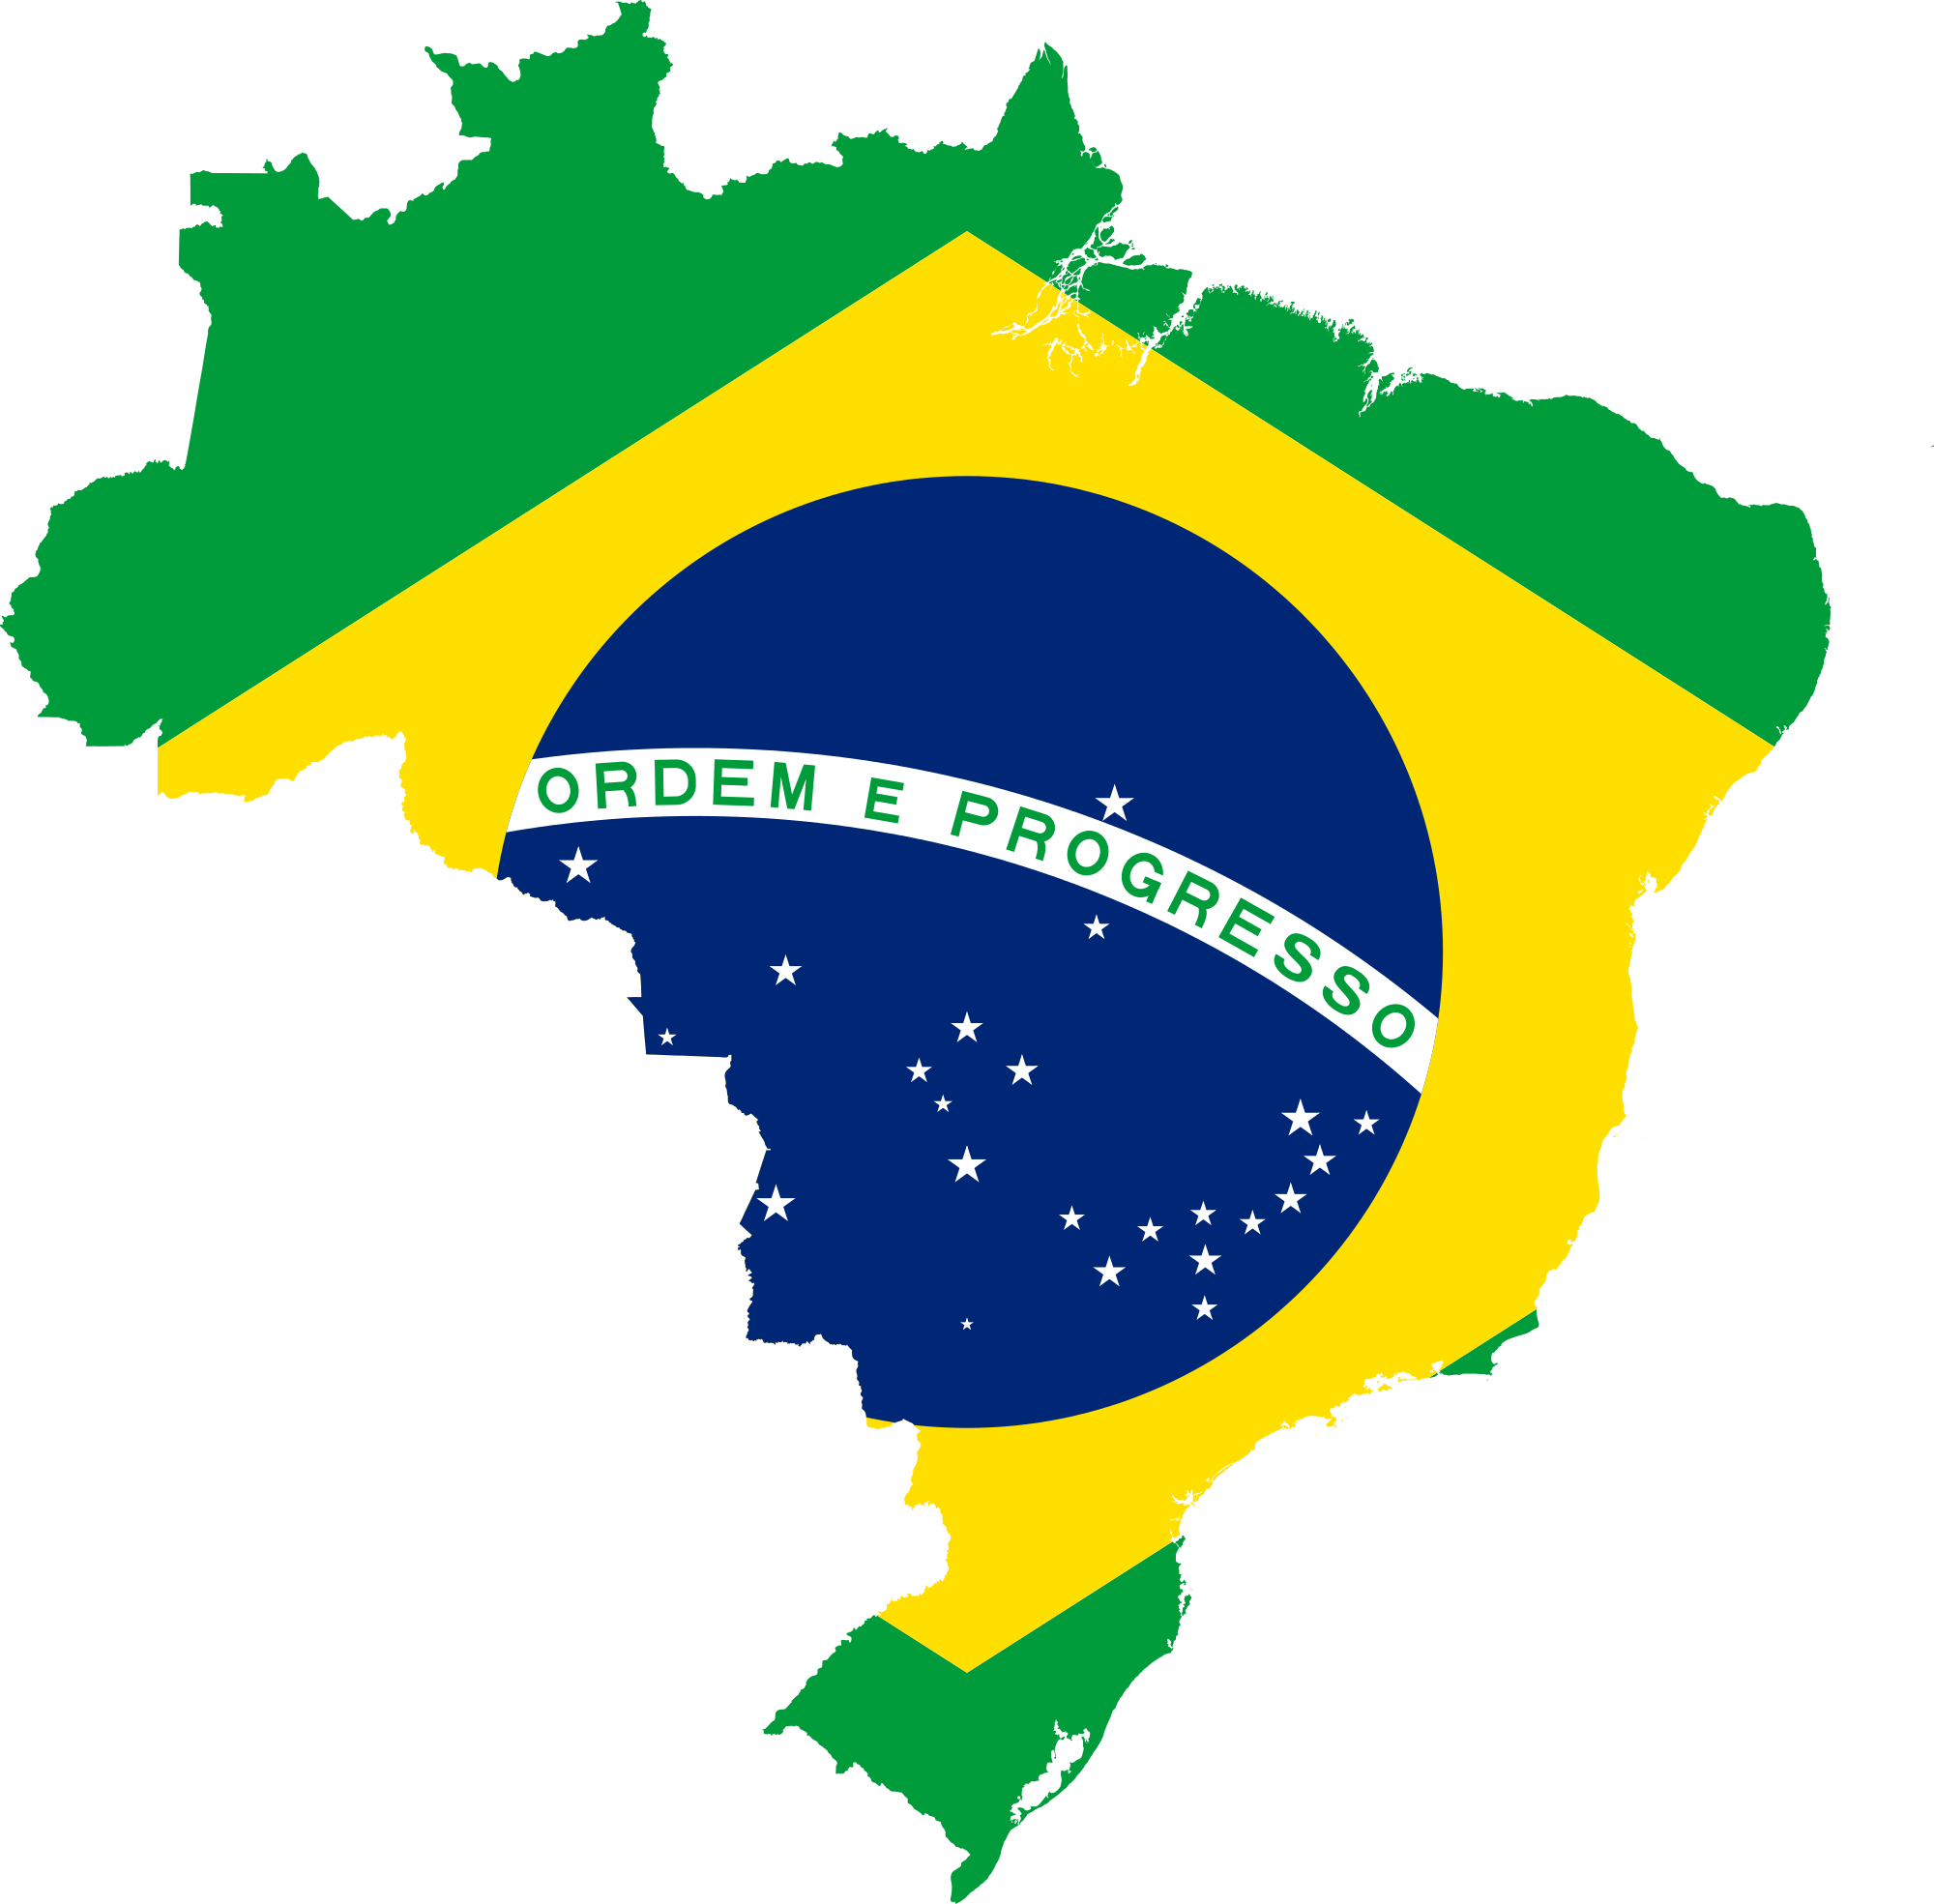 File:Map of Brazil with flag.svg